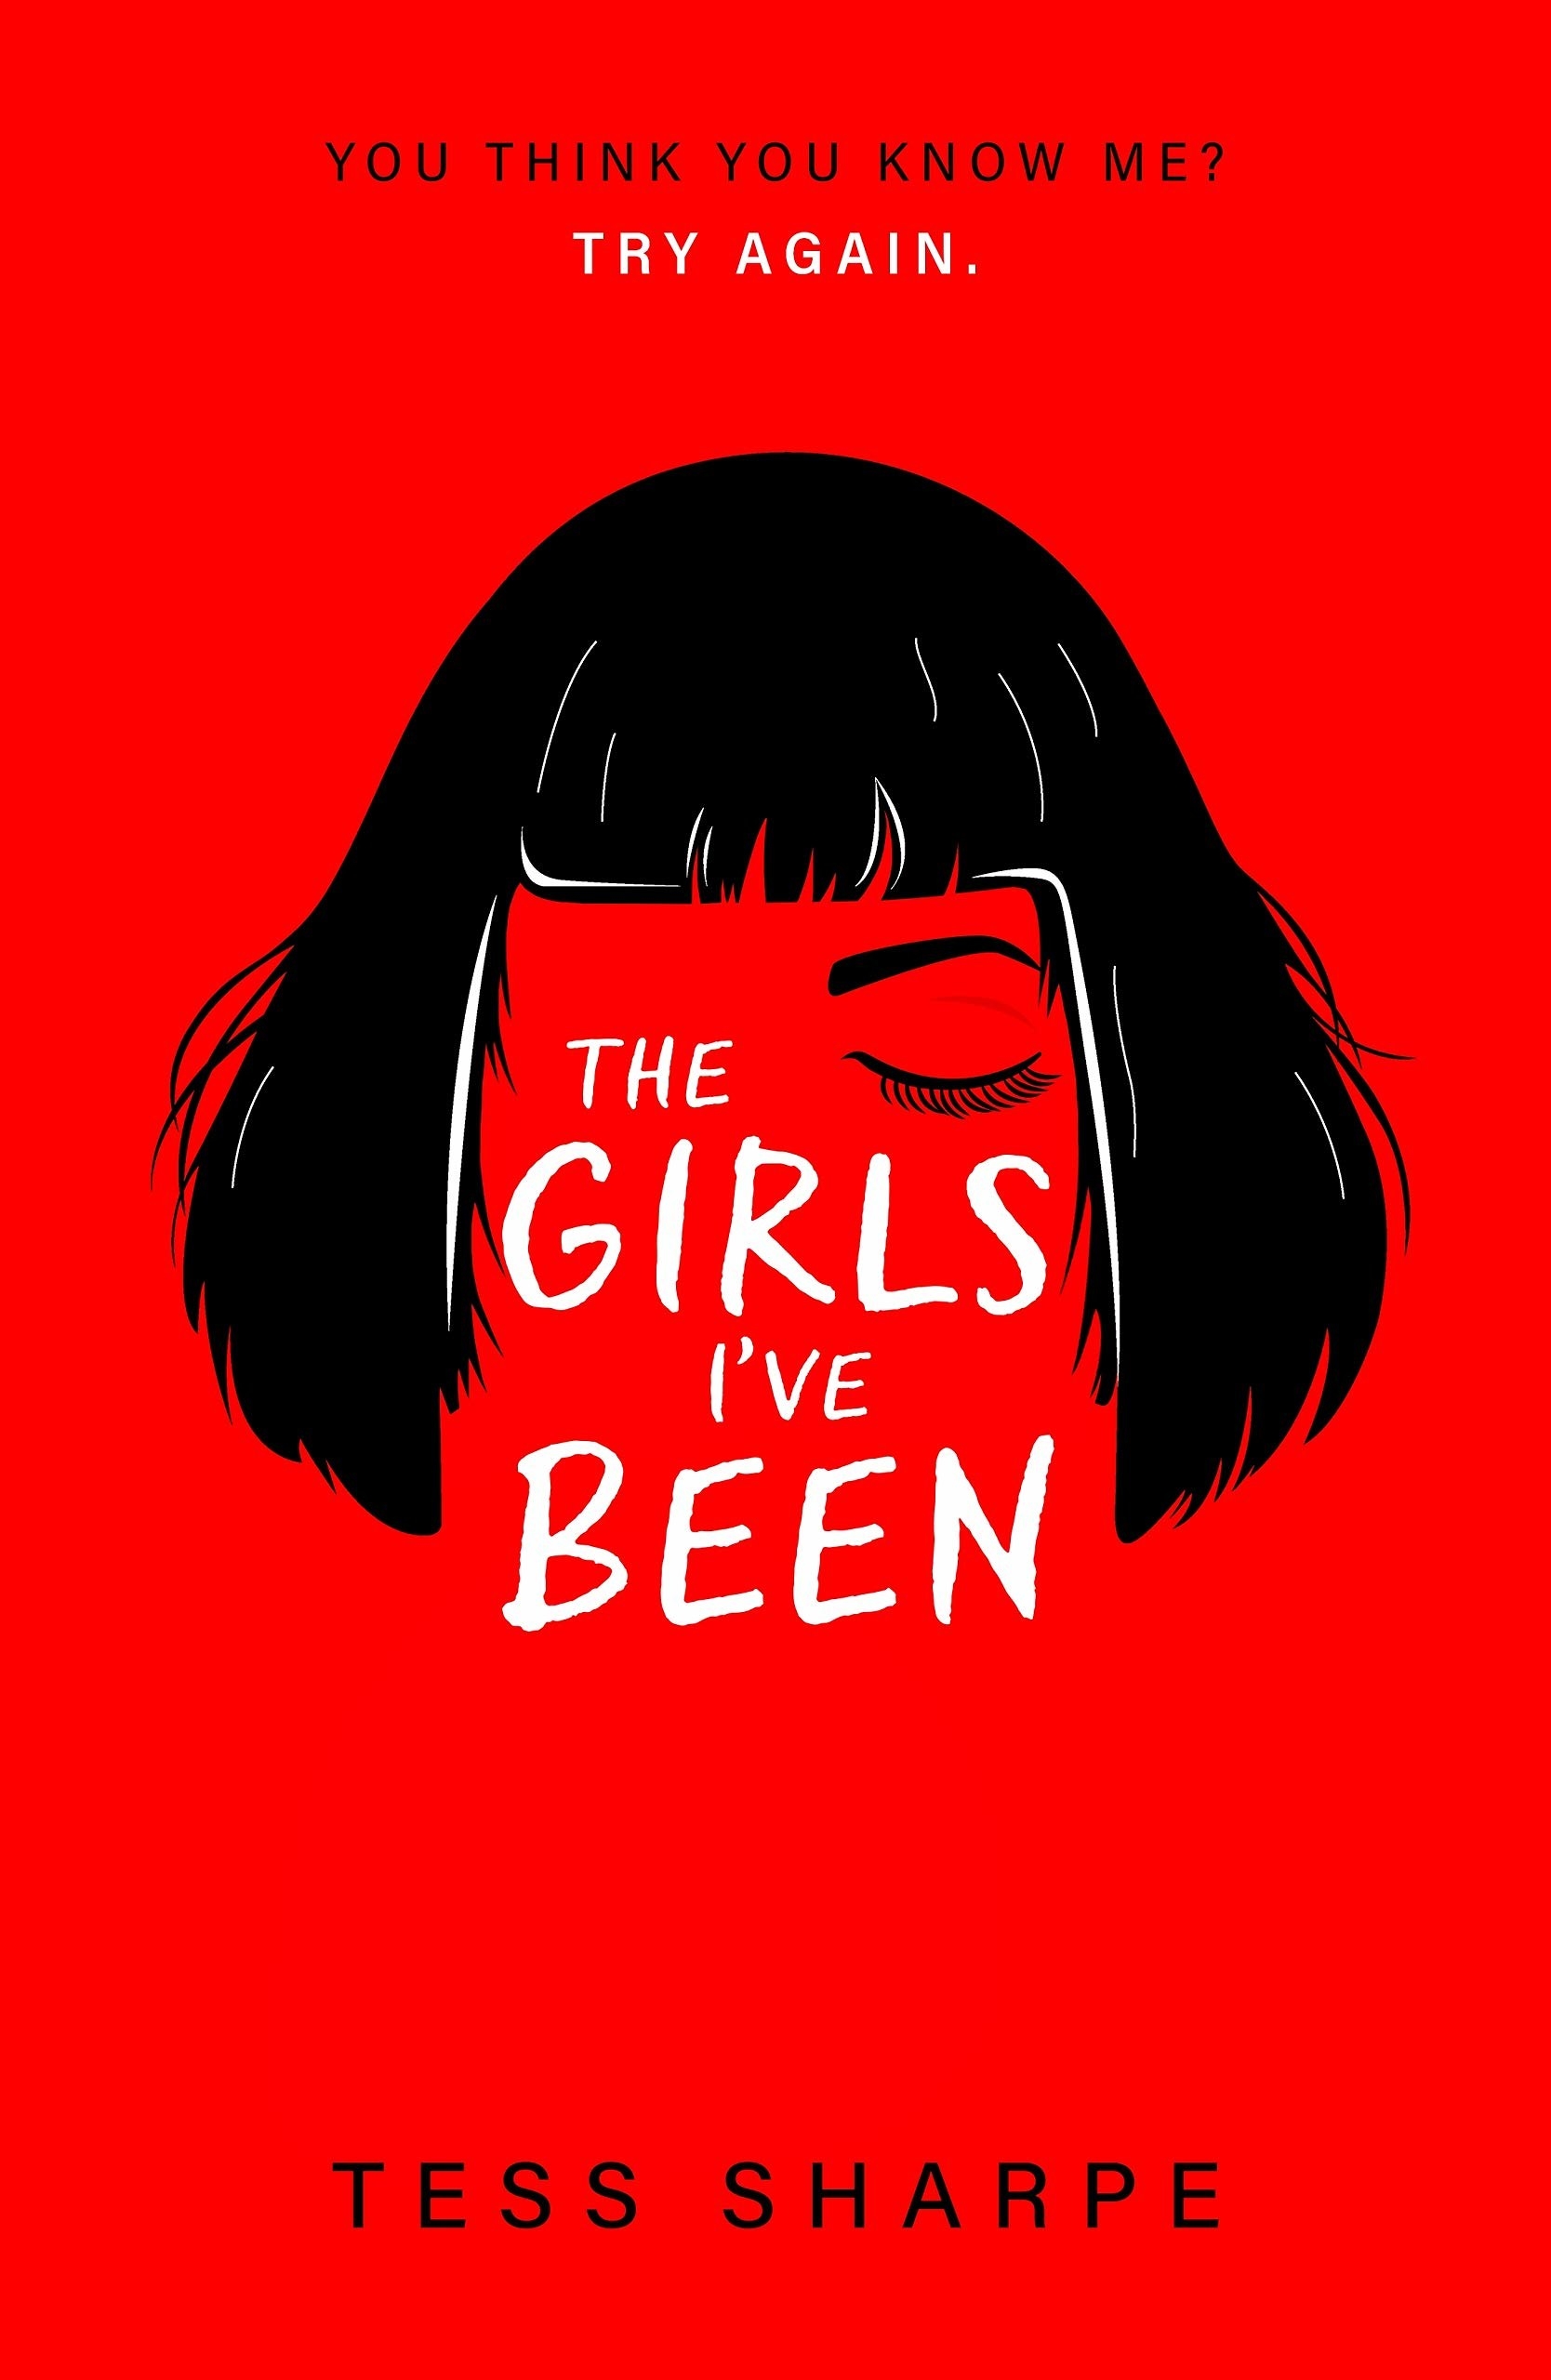 Red book cover with a black shadow shaped like a girls head of hair, and one closed eye. The title of the book is in black under the image.